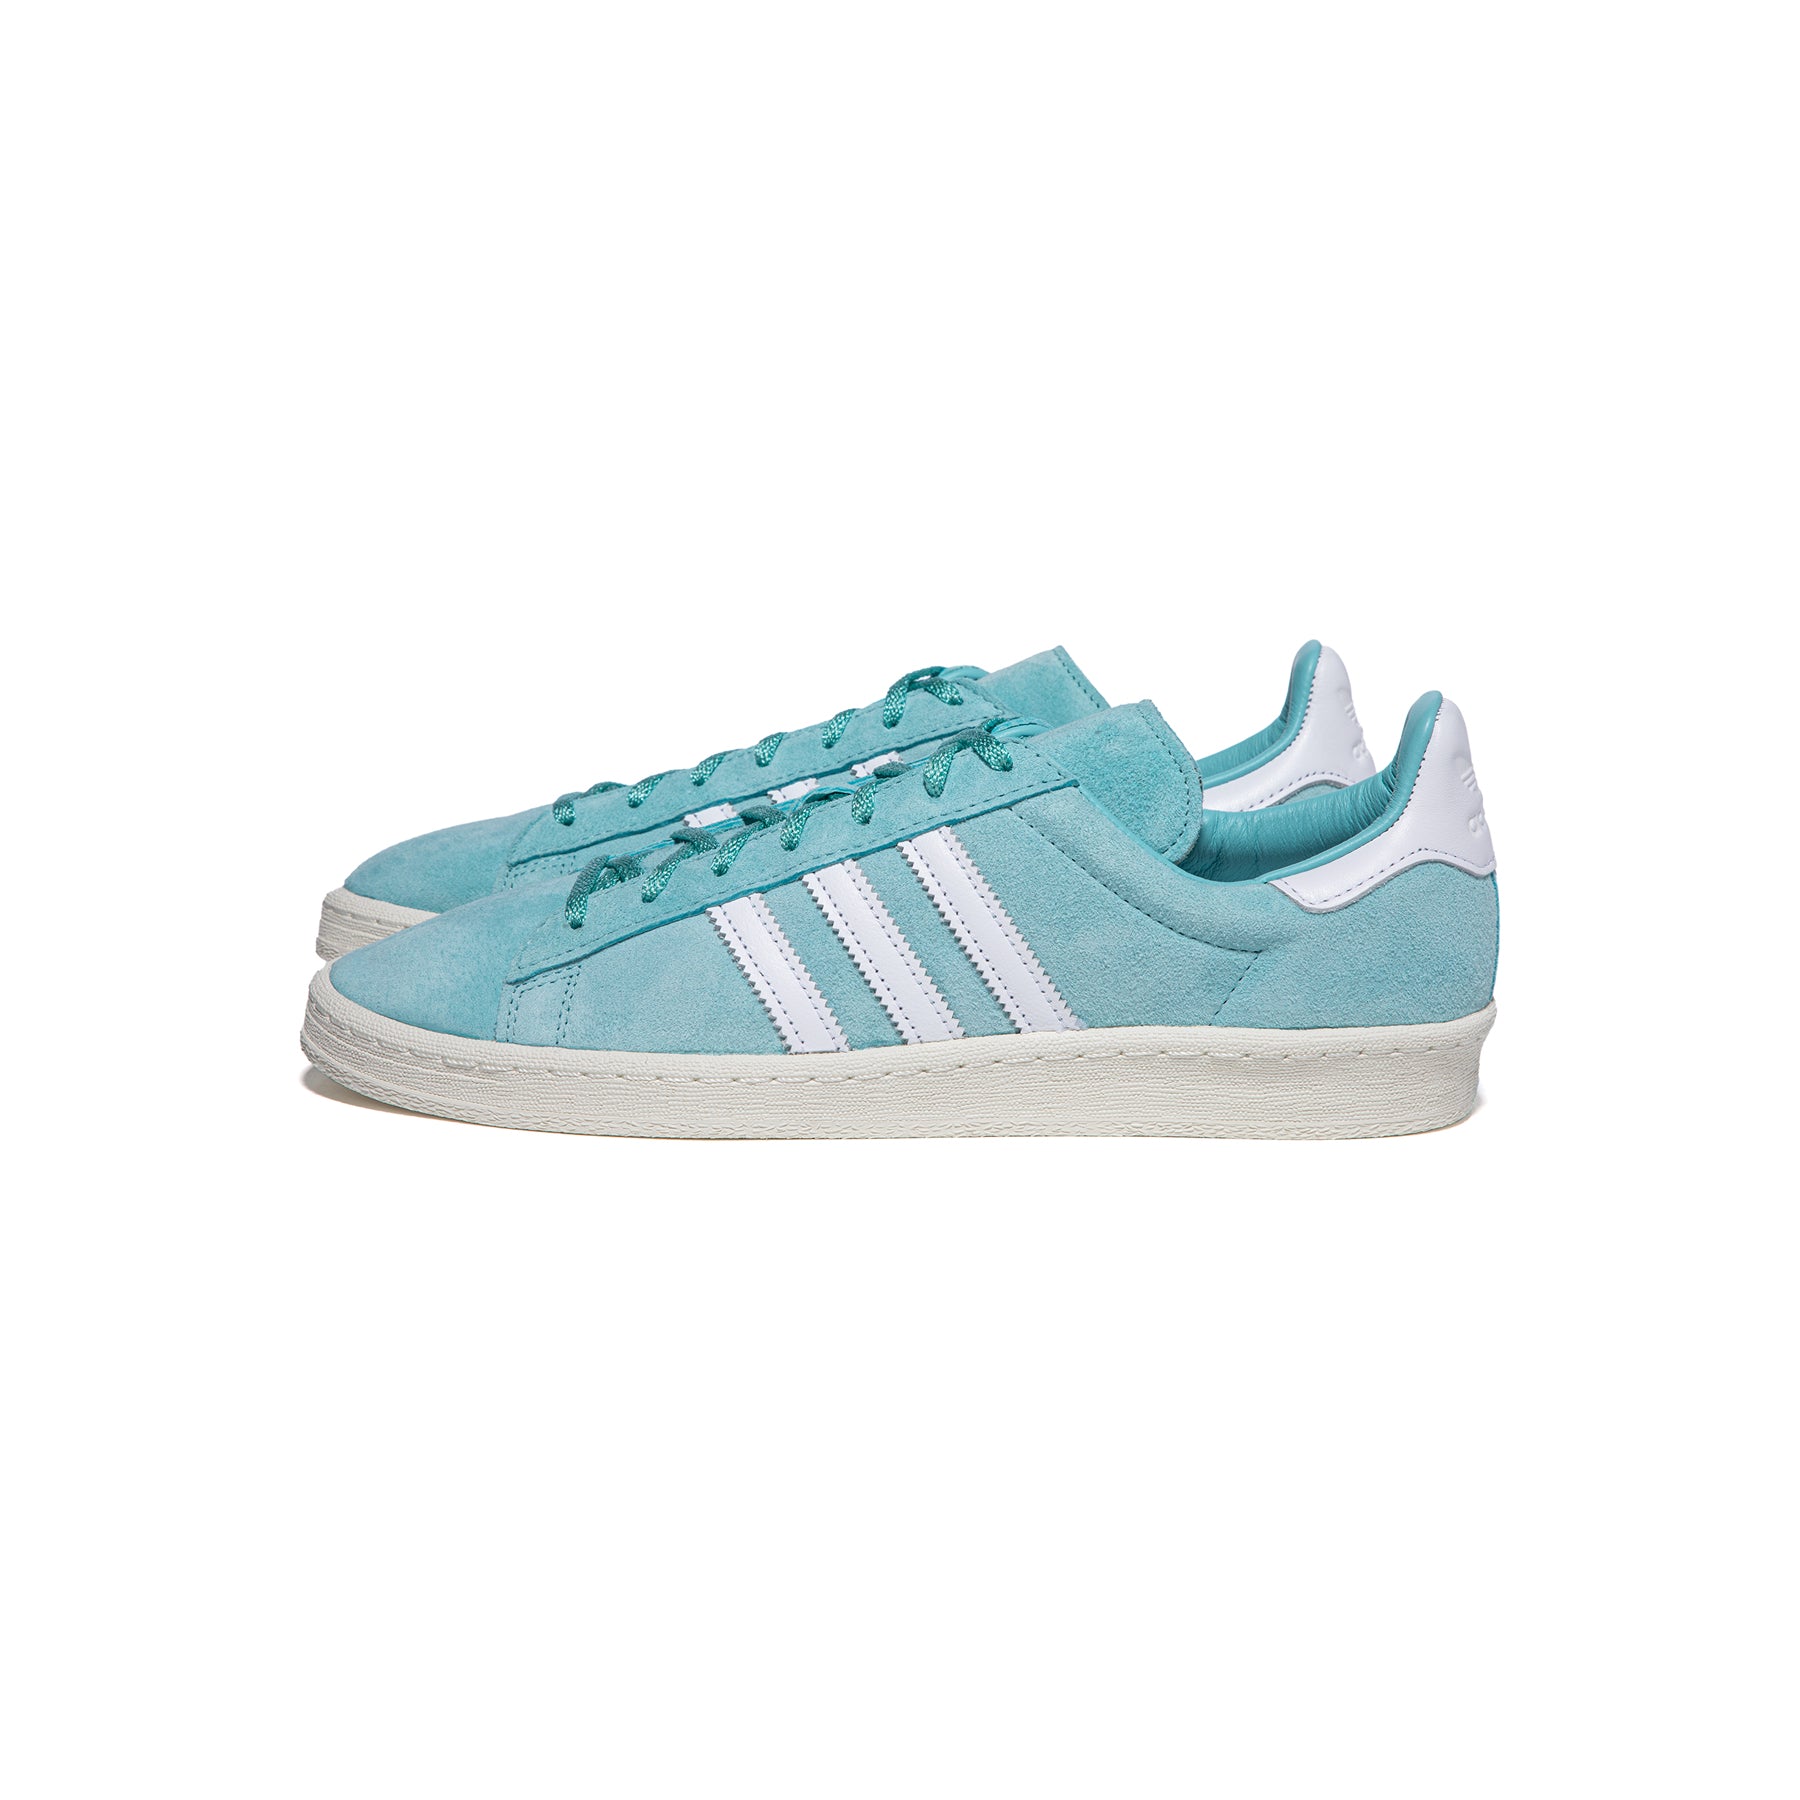 adidas Campus 80 (Easy Mint/Cloud White/Off White) – CNCPTS